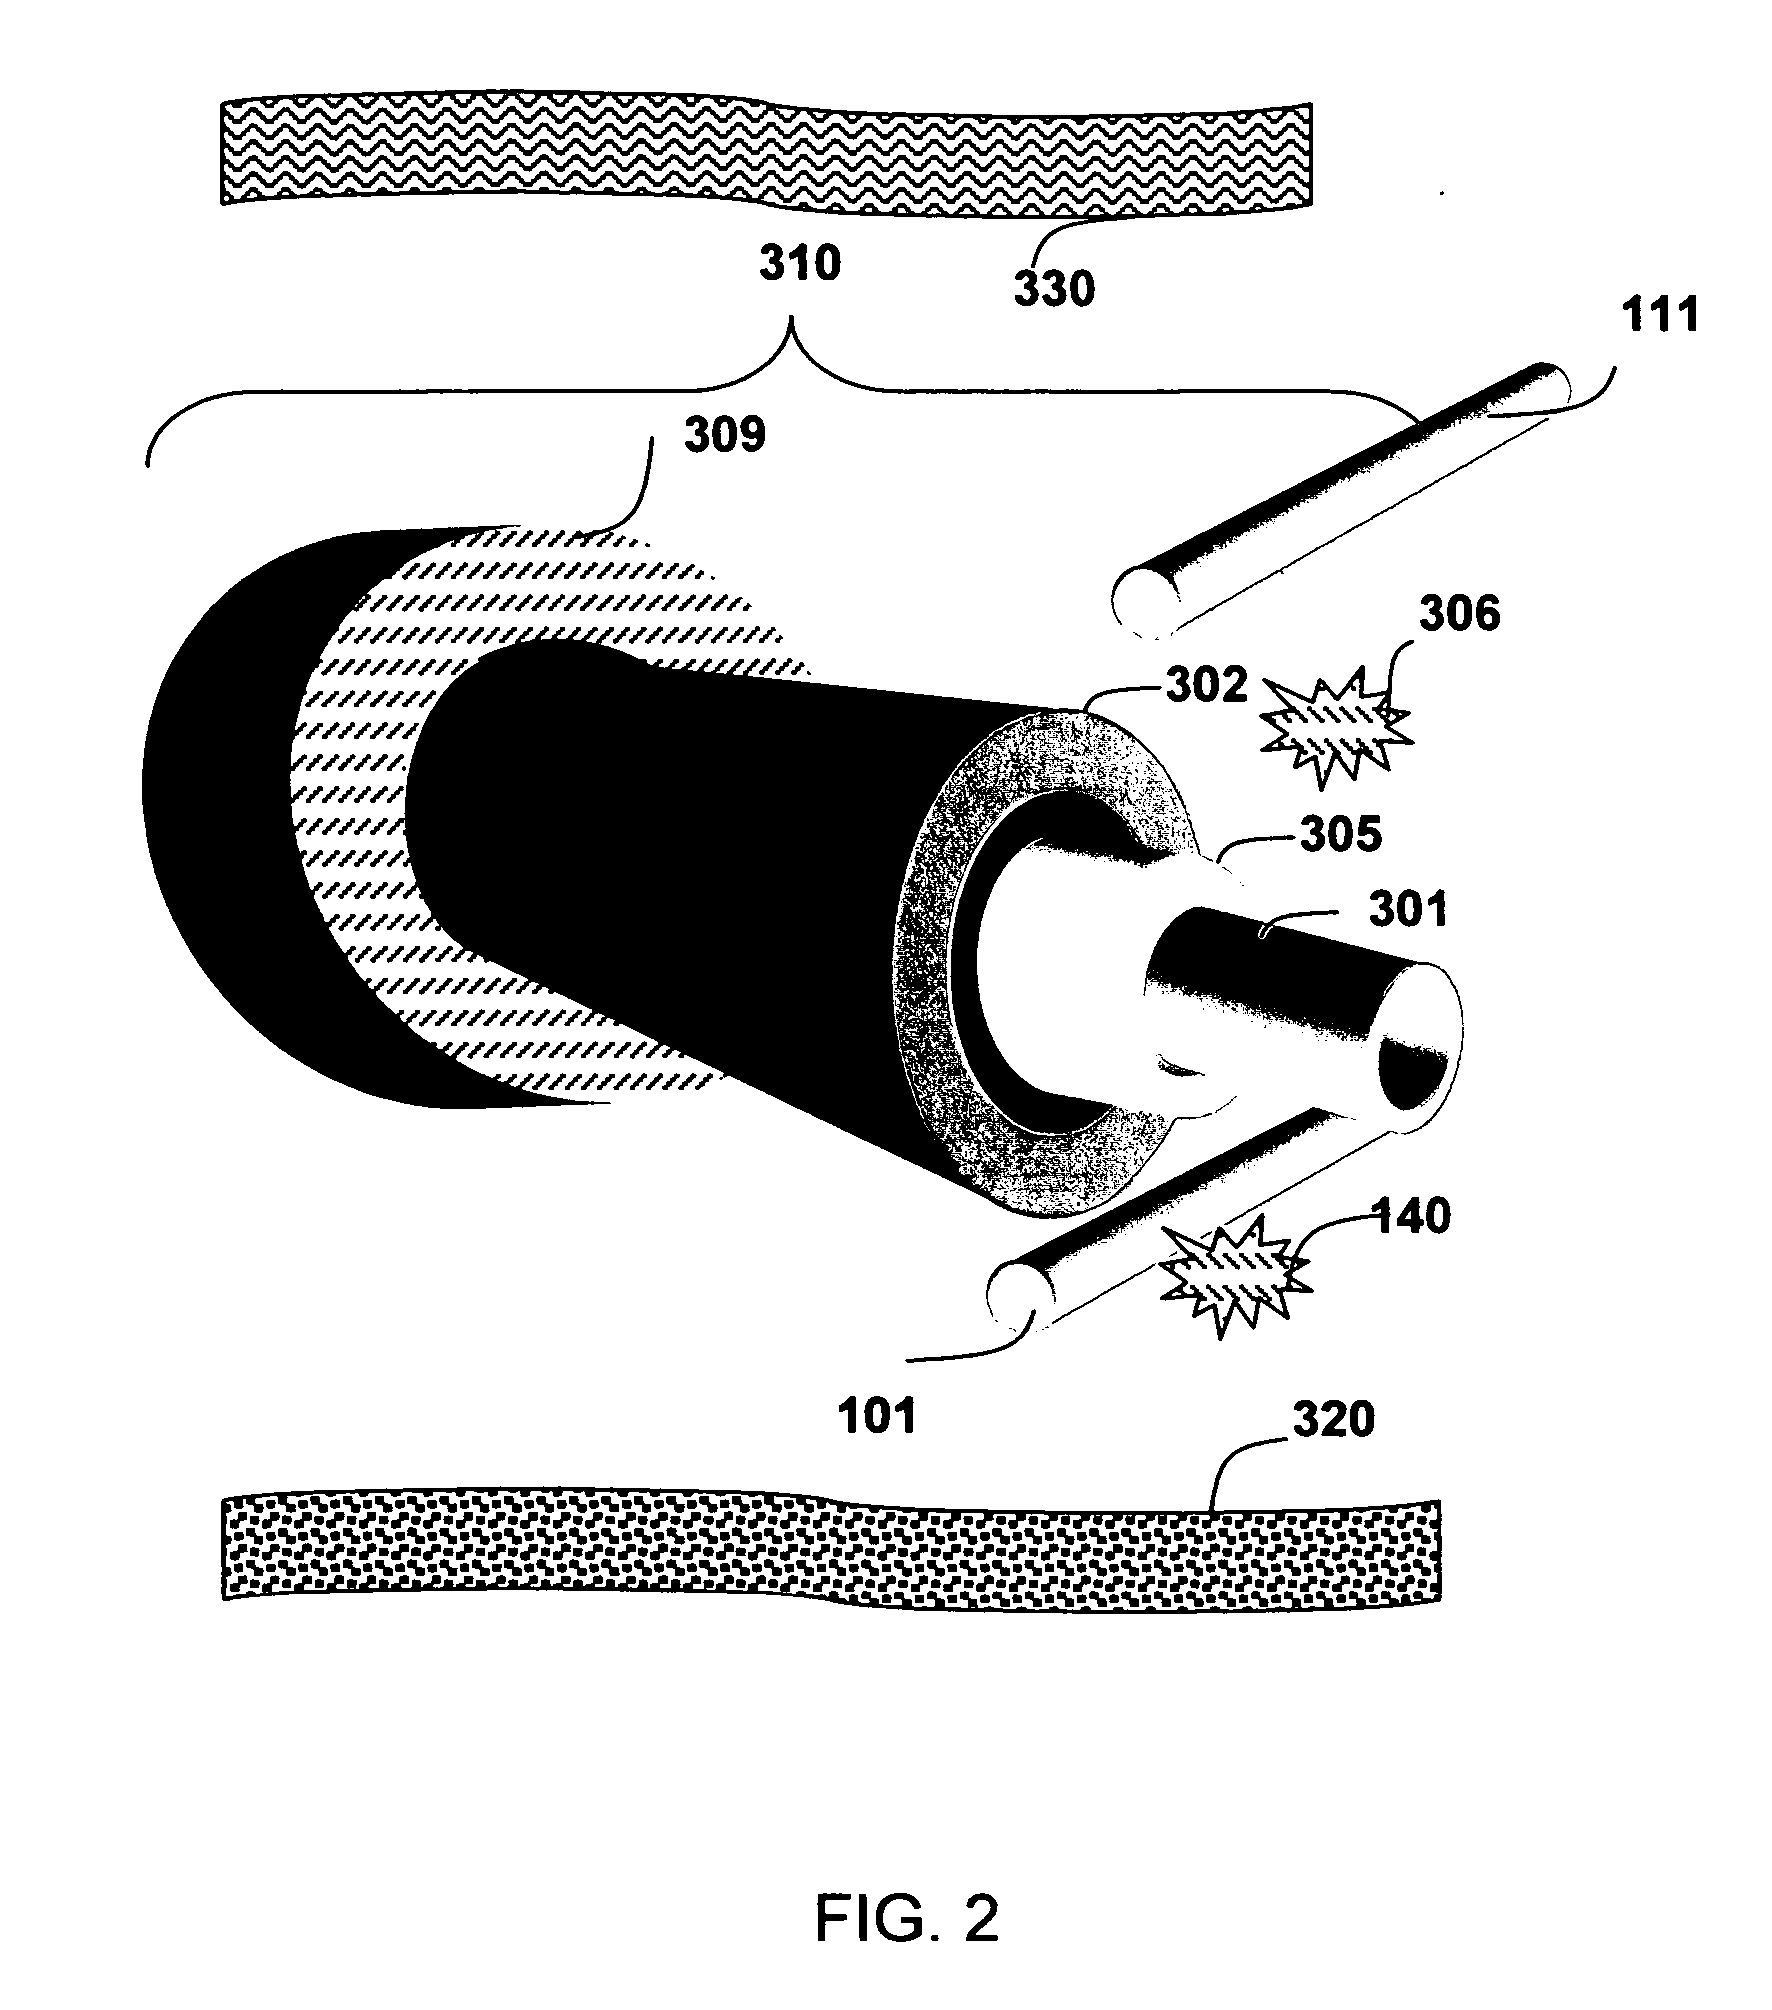 Ablation apparatus and system to limit nerve conduction